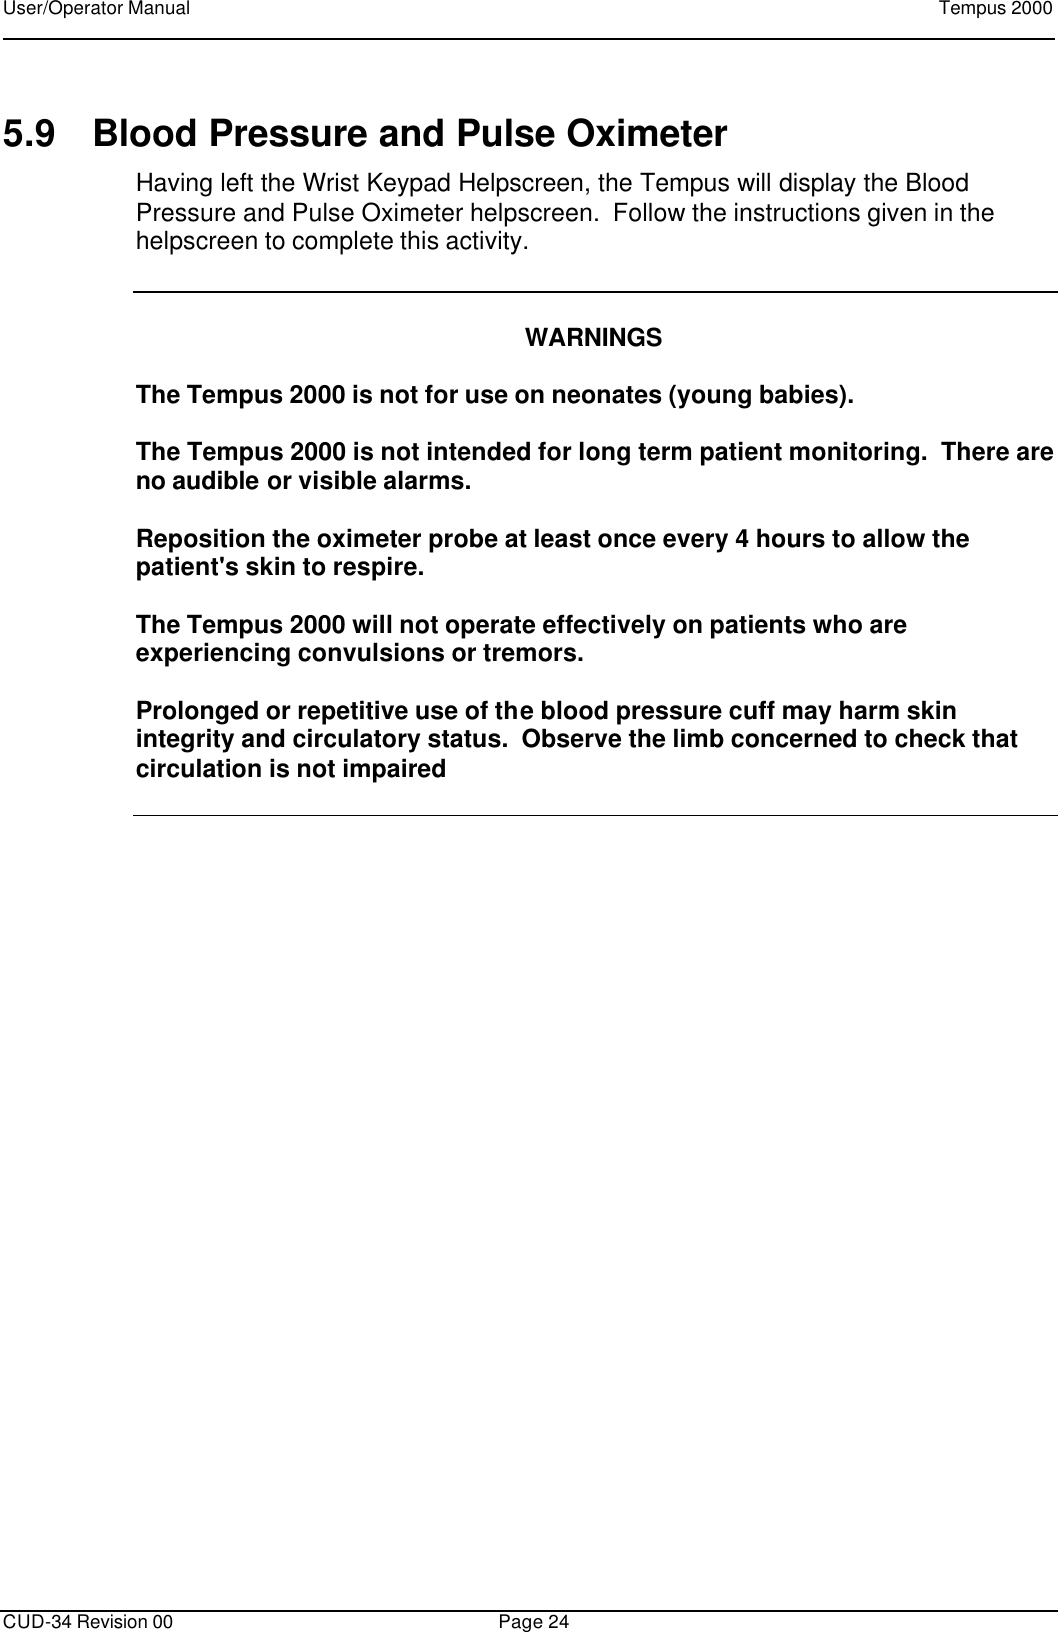 User/Operator Manual    Tempus 2000      CUD-34 Revision 00 Page 24  5.9 Blood Pressure and Pulse Oximeter Having left the Wrist Keypad Helpscreen, the Tempus will display the Blood Pressure and Pulse Oximeter helpscreen.  Follow the instructions given in the helpscreen to complete this activity.     WARNINGS  The Tempus 2000 is not for use on neonates (young babies).  The Tempus 2000 is not intended for long term patient monitoring.  There are no audible or visible alarms.  Reposition the oximeter probe at least once every 4 hours to allow the patient&apos;s skin to respire.  The Tempus 2000 will not operate effectively on patients who are experiencing convulsions or tremors.  Prolonged or repetitive use of the blood pressure cuff may harm skin integrity and circulatory status.  Observe the limb concerned to check that circulation is not impaired   